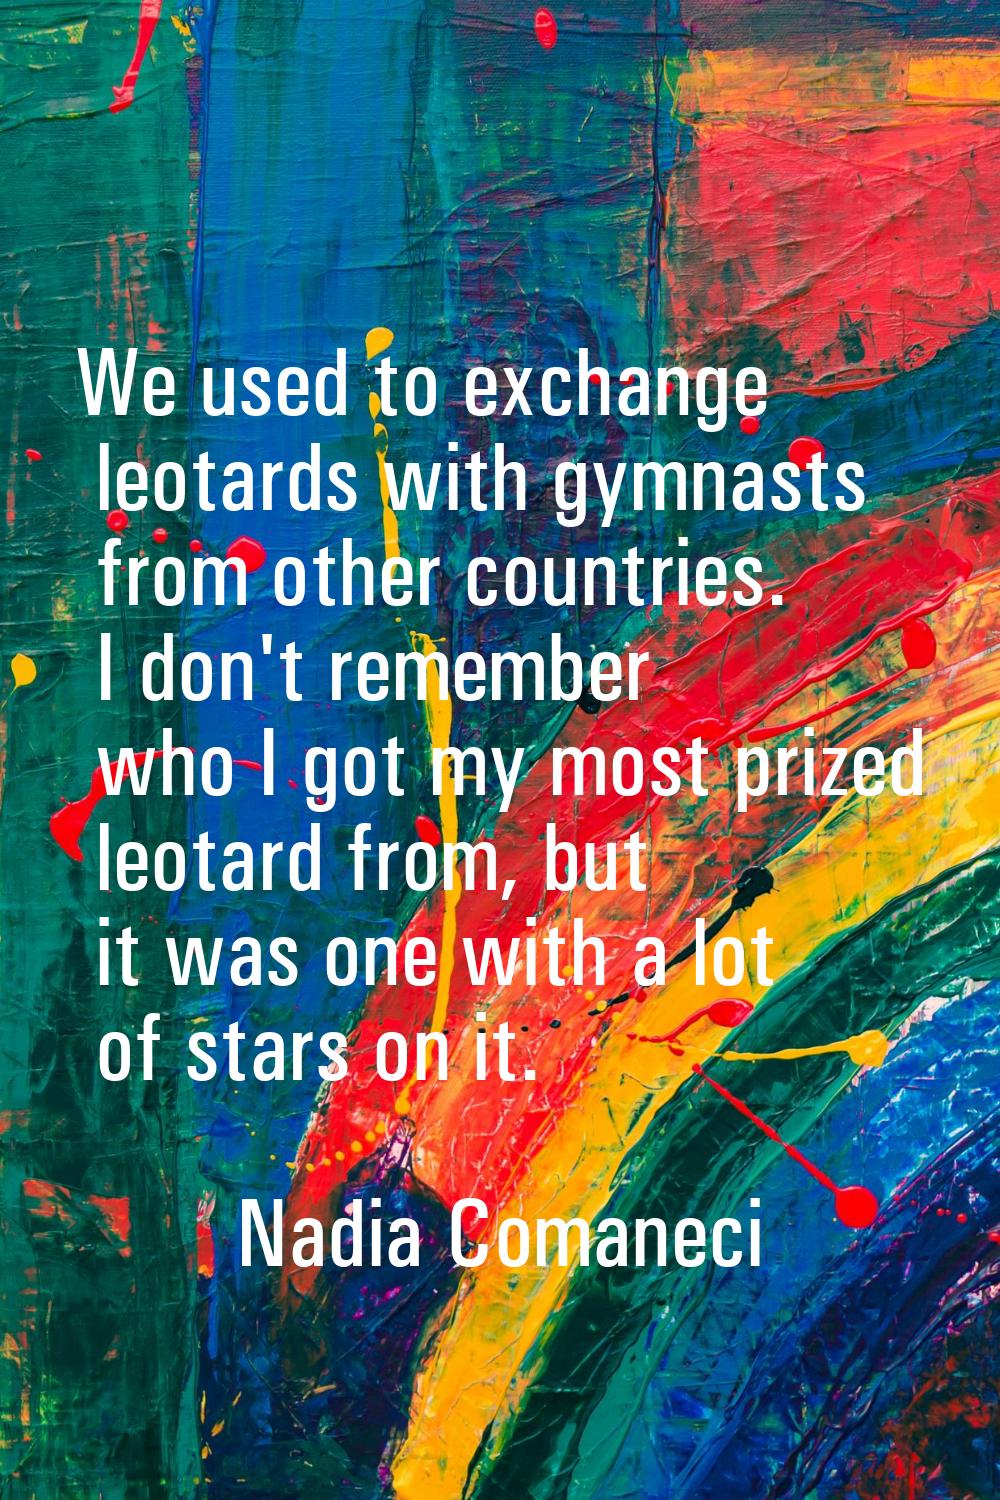 We used to exchange leotards with gymnasts from other countries. I don't remember who I got my most